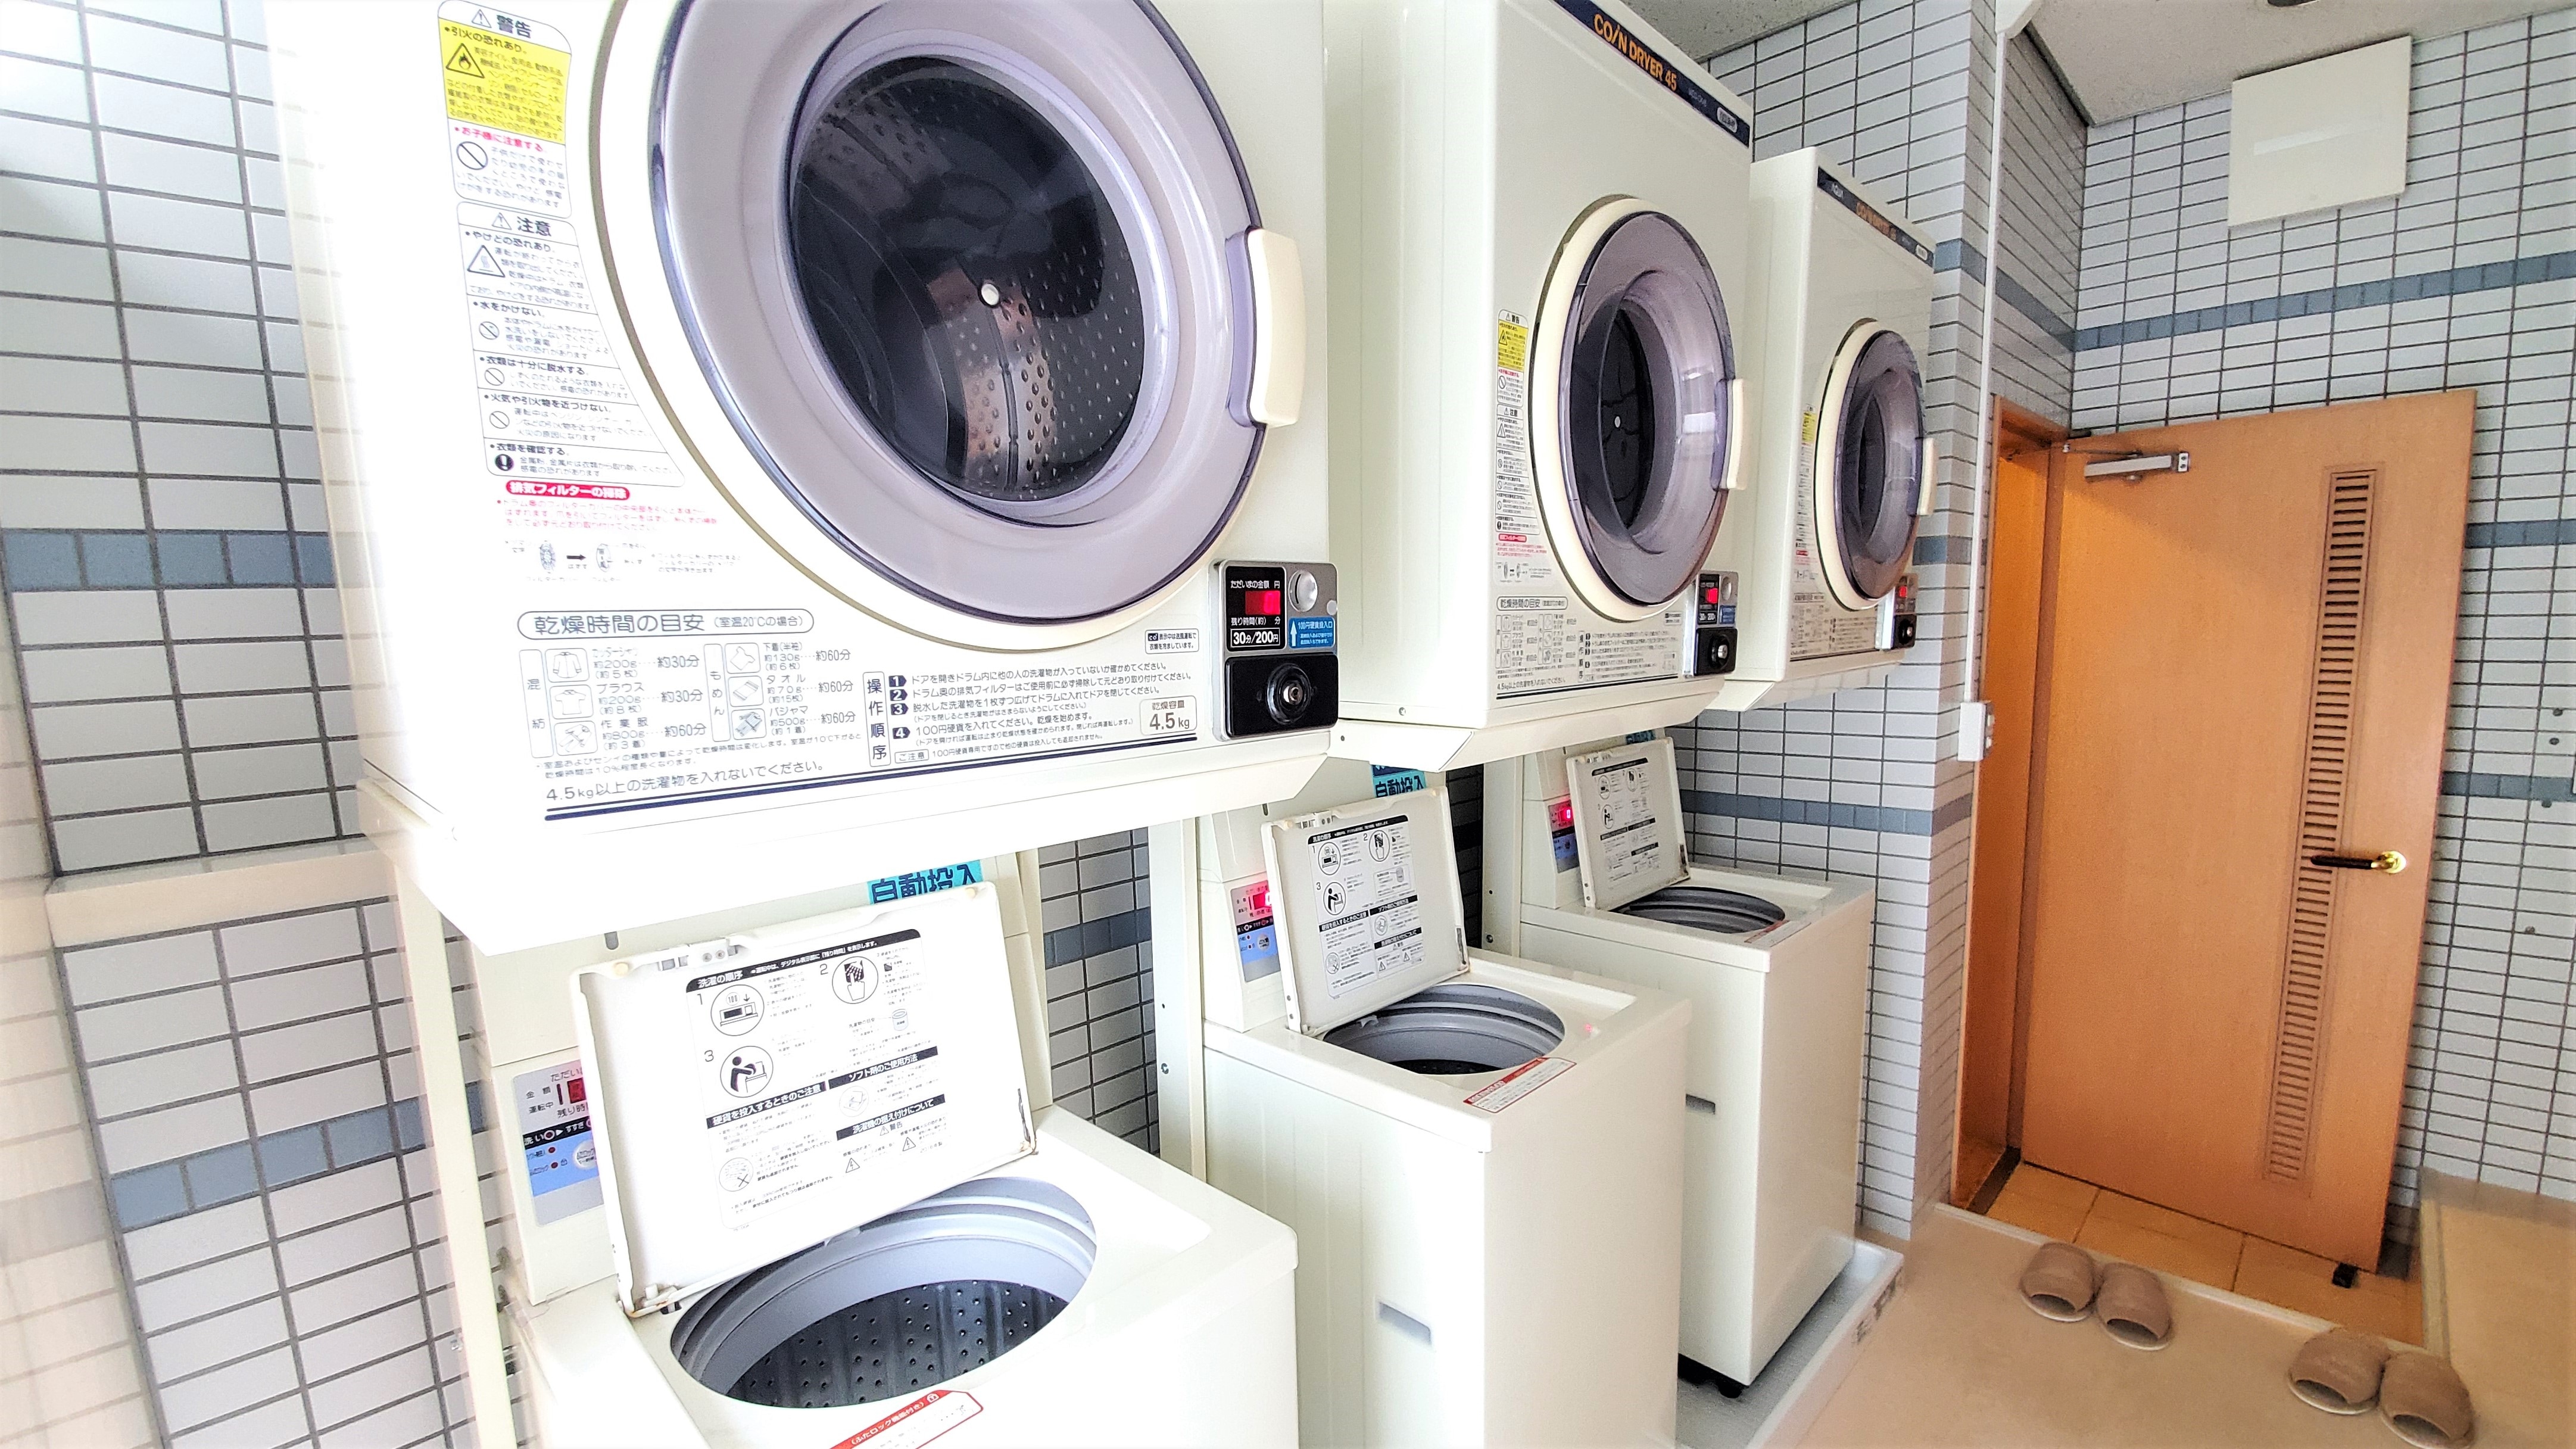 Coin laundry ◆ Available 24 hours a day! 3 units installed ◆